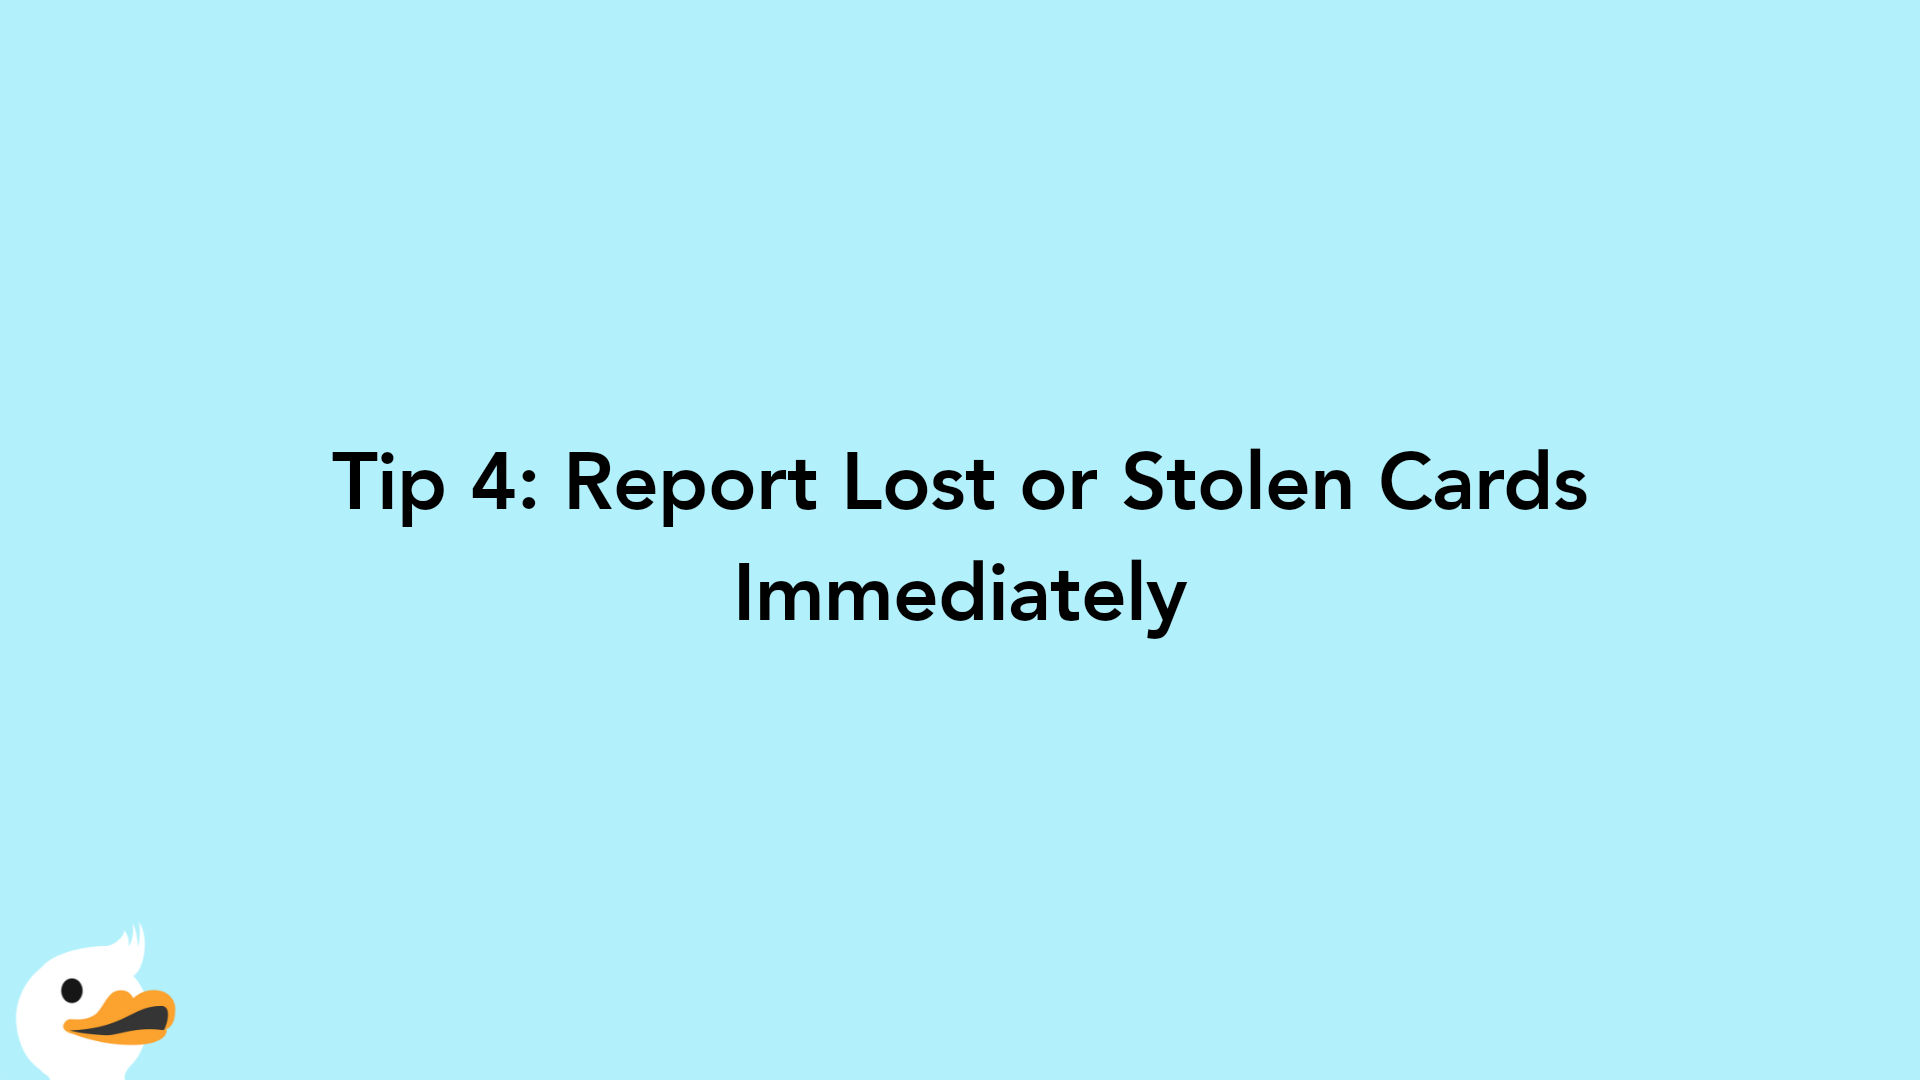 Tip 4: Report Lost or Stolen Cards Immediately